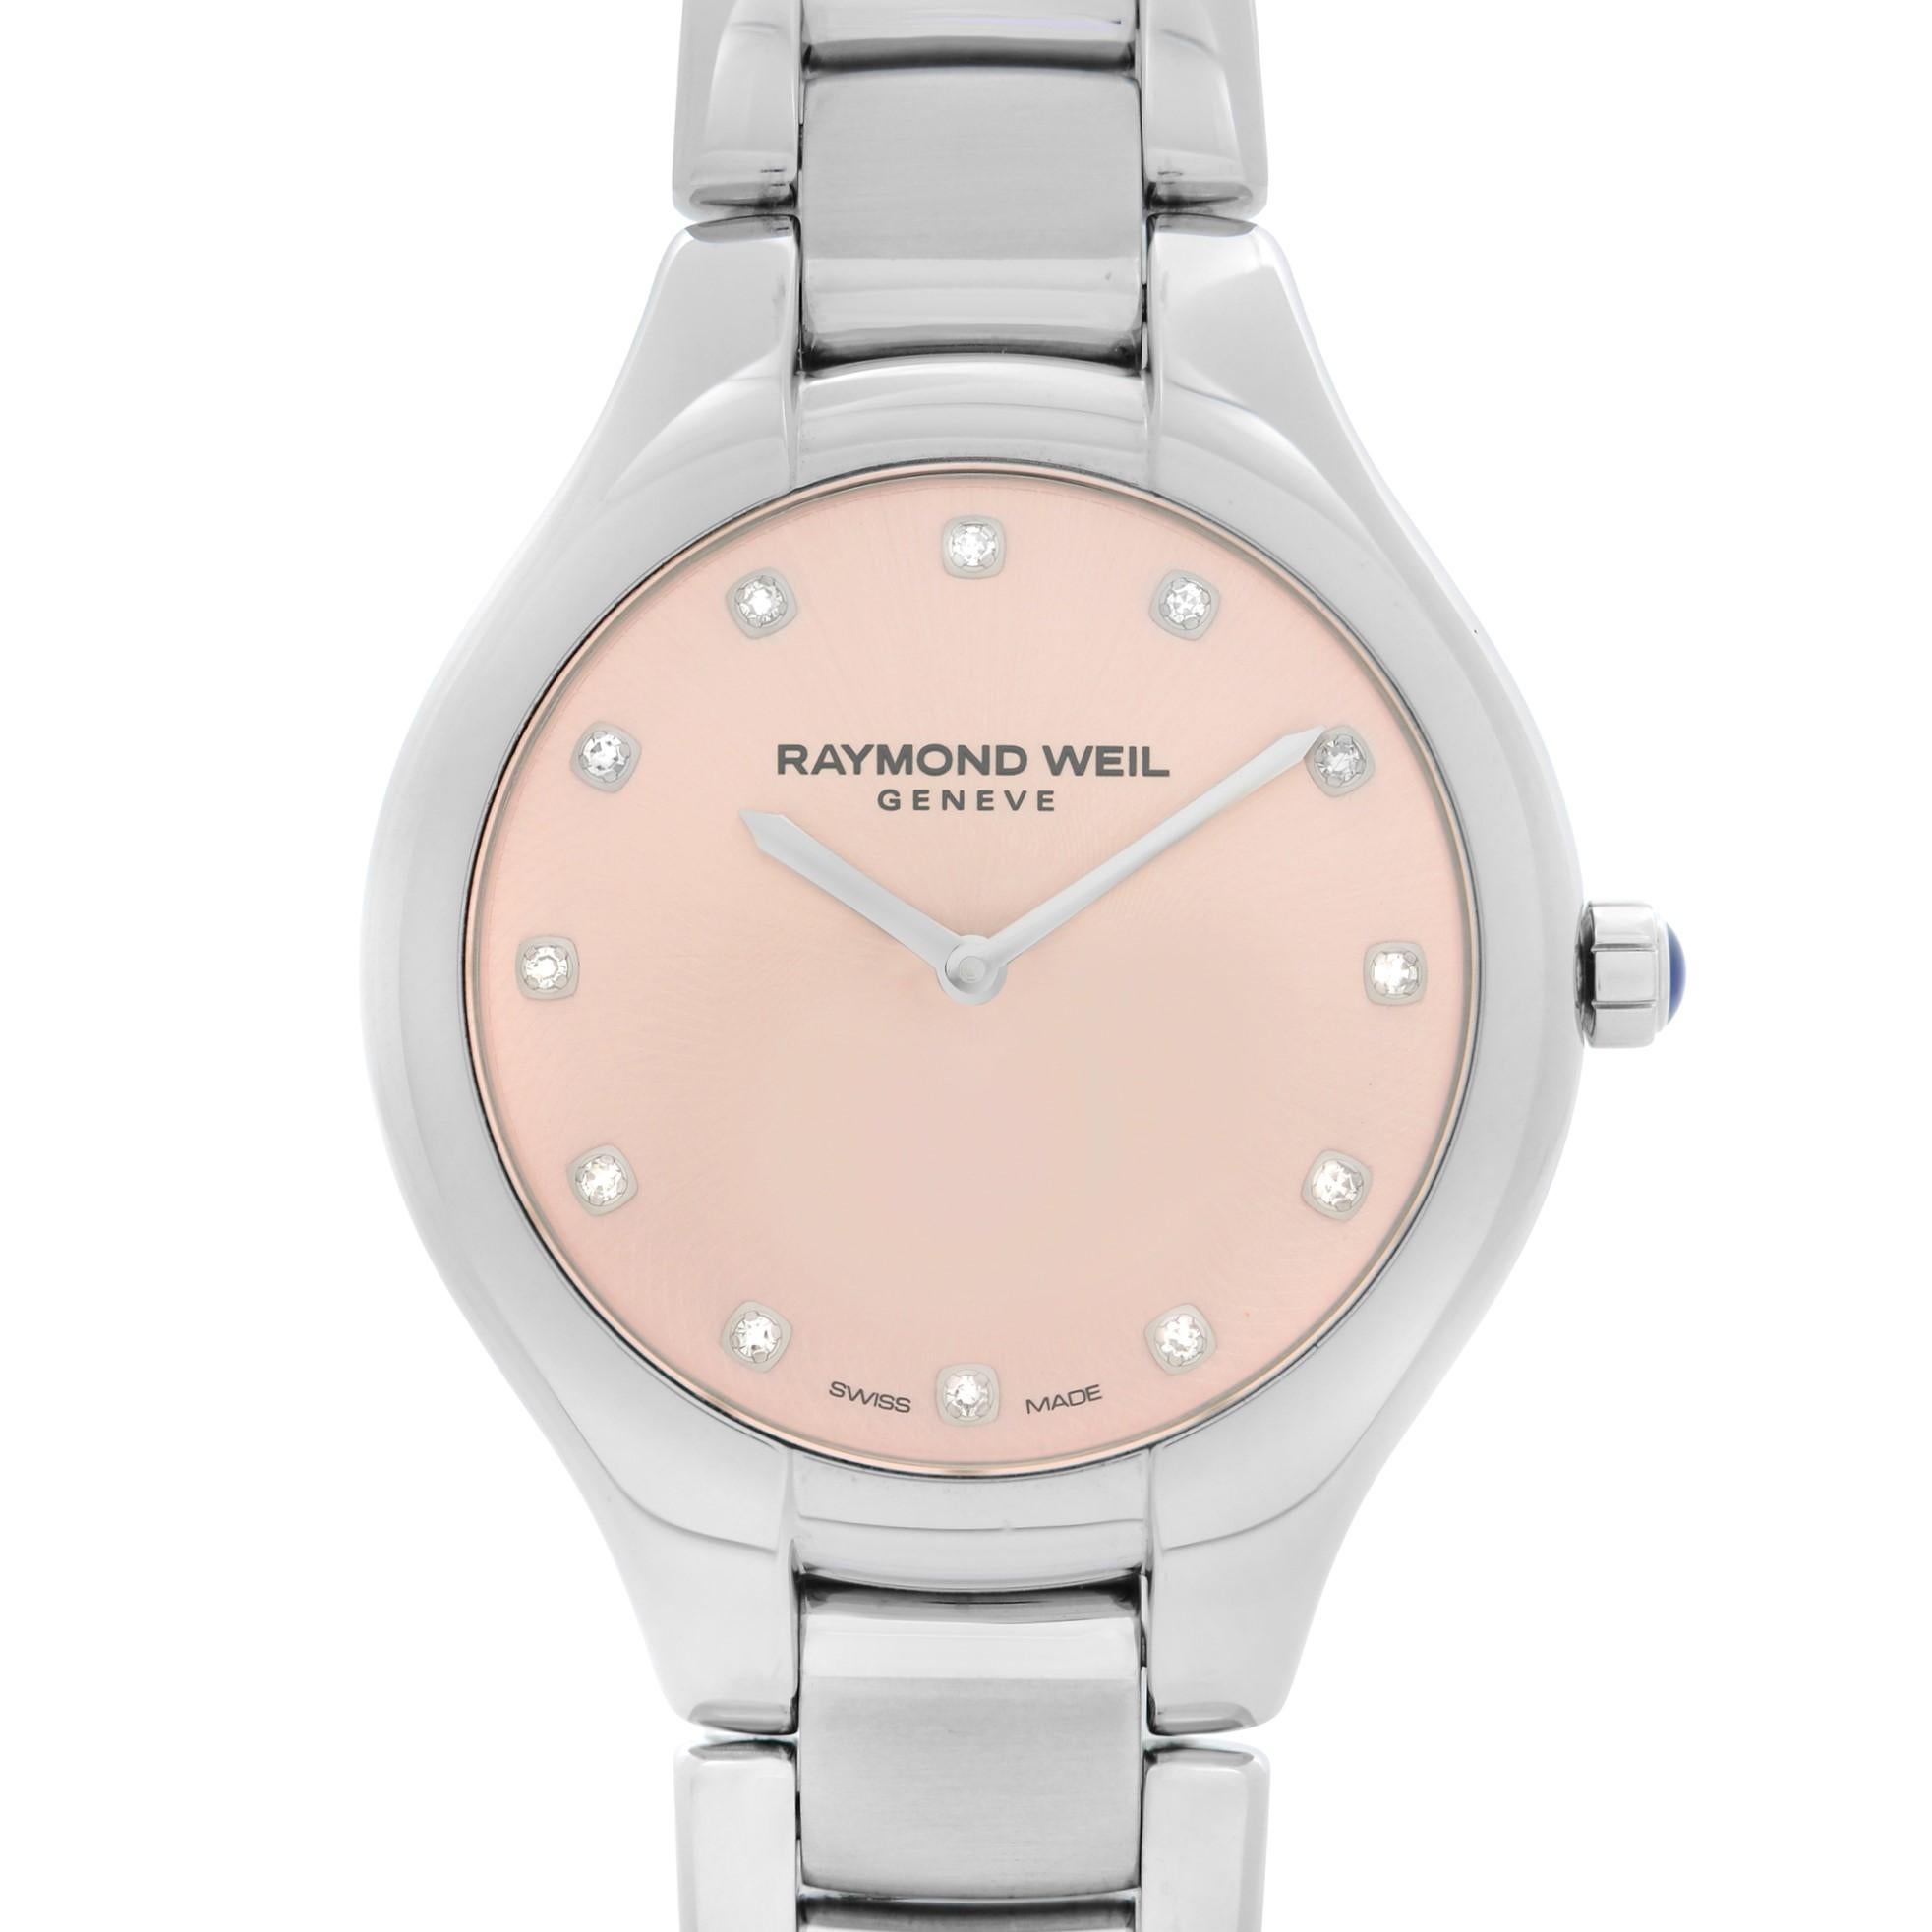 New Raymond Weil Noemia Steel Diamonds Pink Dial Quartz Ladies Watch 5132-ST-80081. This Beautiful Timepiece Features: Stainless Steel Case and Bracelet, Fixed Stainless Steel Bezel, Pink Dial with Silver-Tone Hands, And Diamonds Hour Markers.